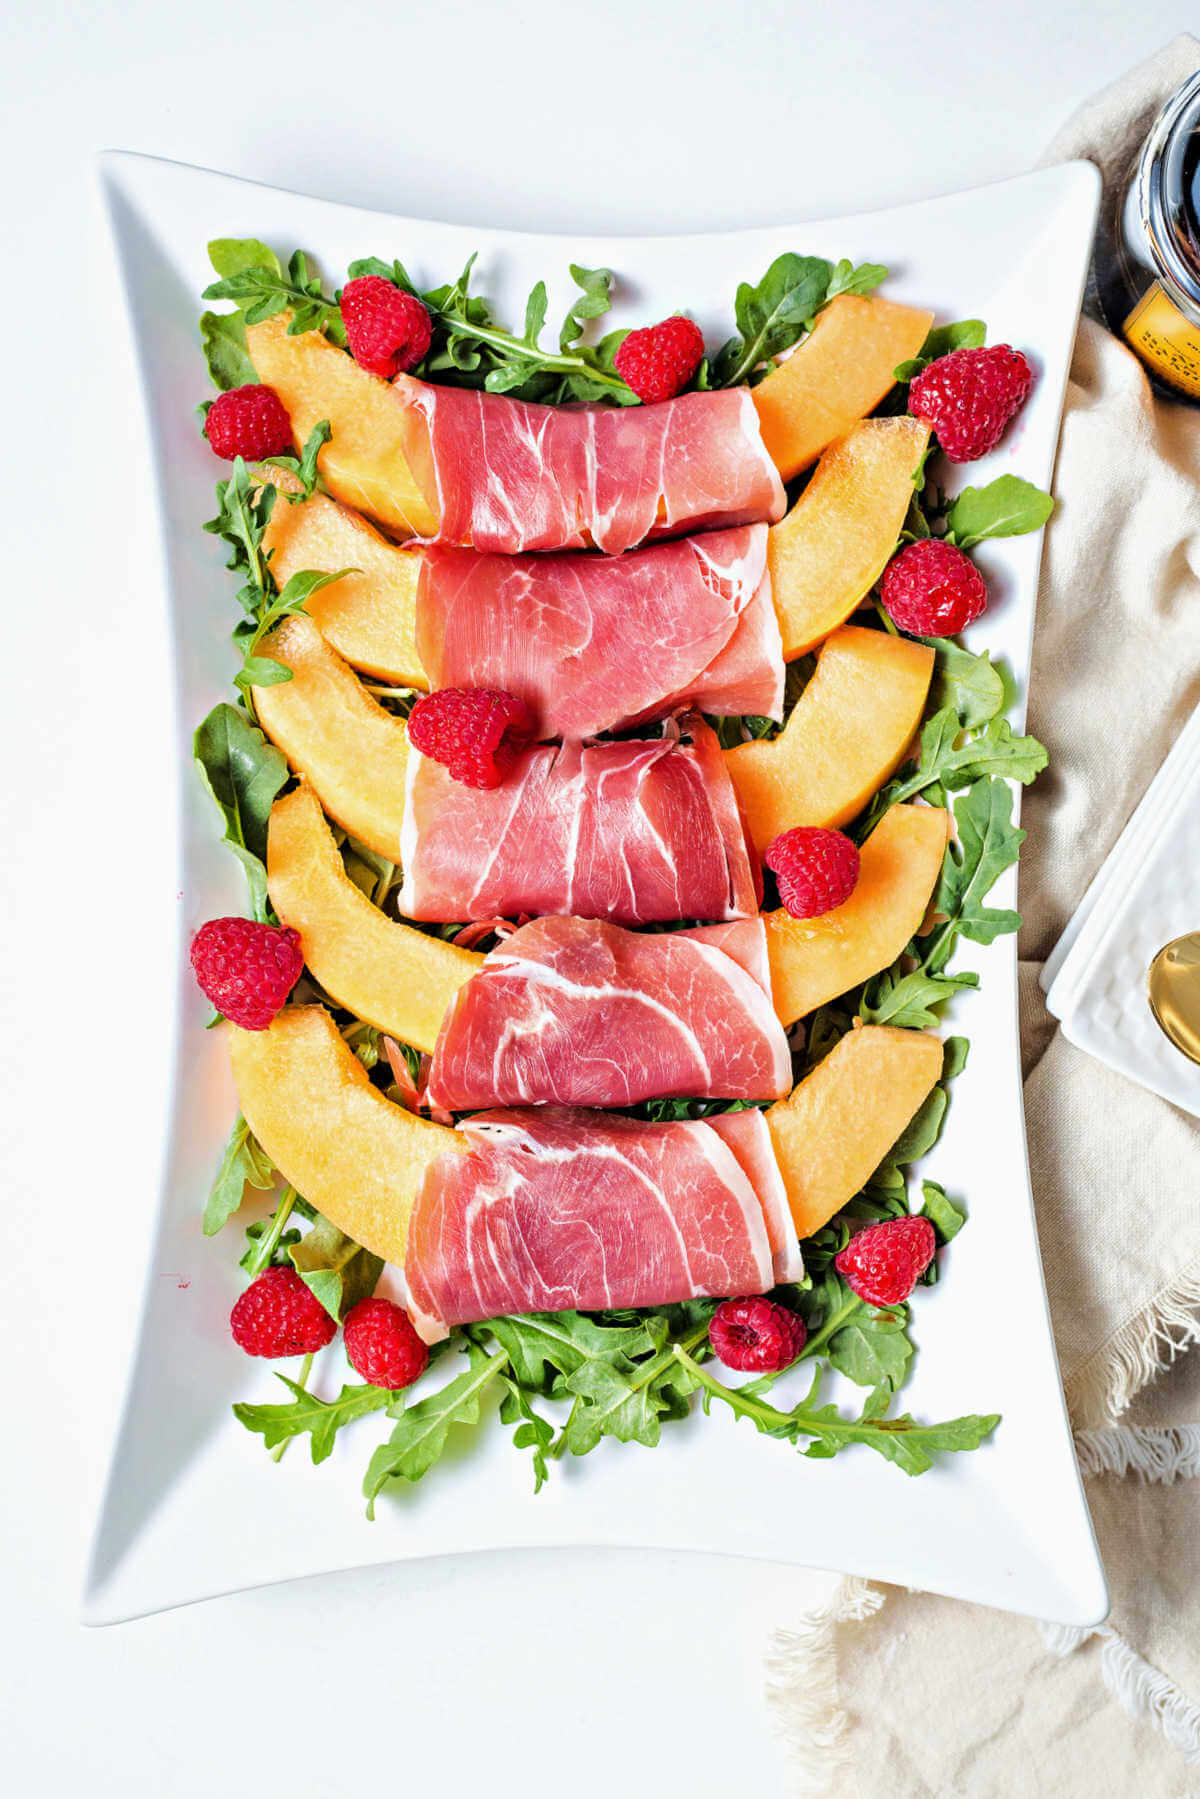 a platter of Prosciutto and Melon on a bed of arugula with raspberries as a garnish.